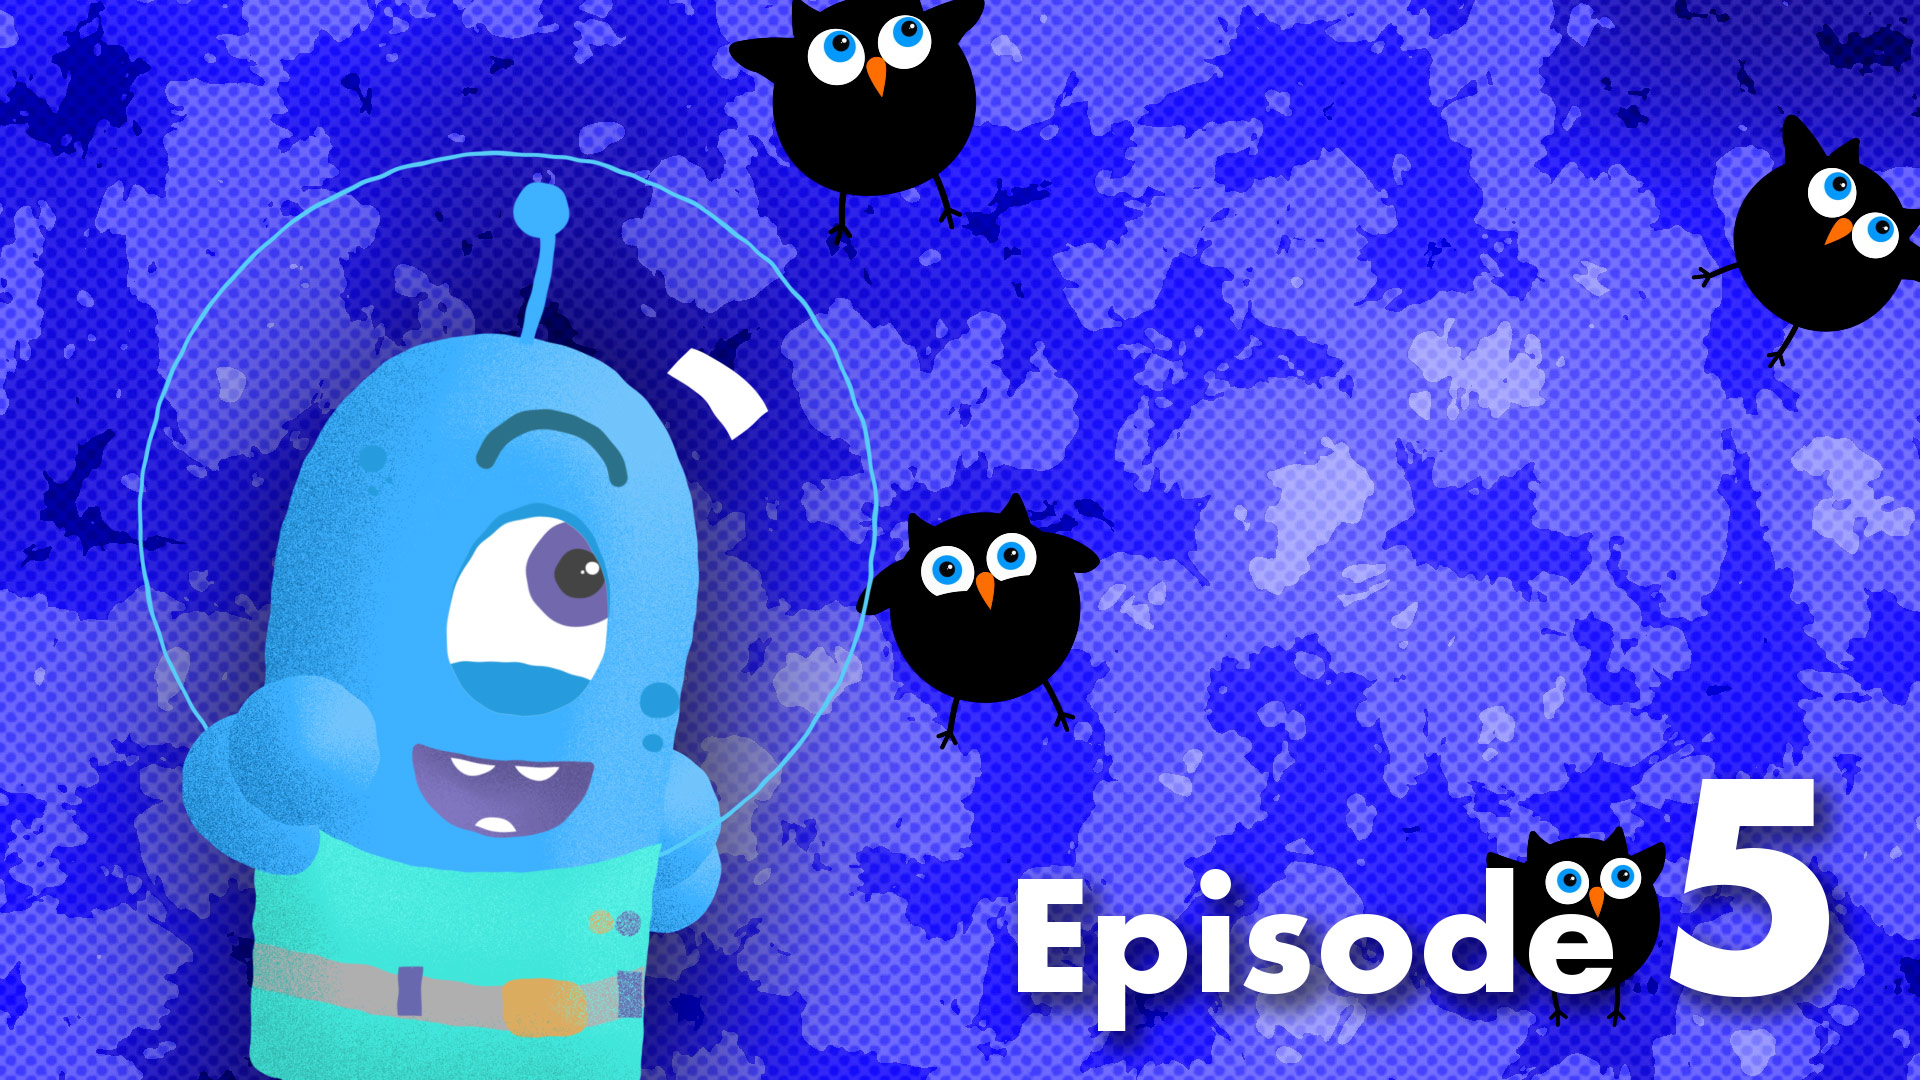 Video thumbnail with a blue cartoon figure and black birds representing black holes in the background.